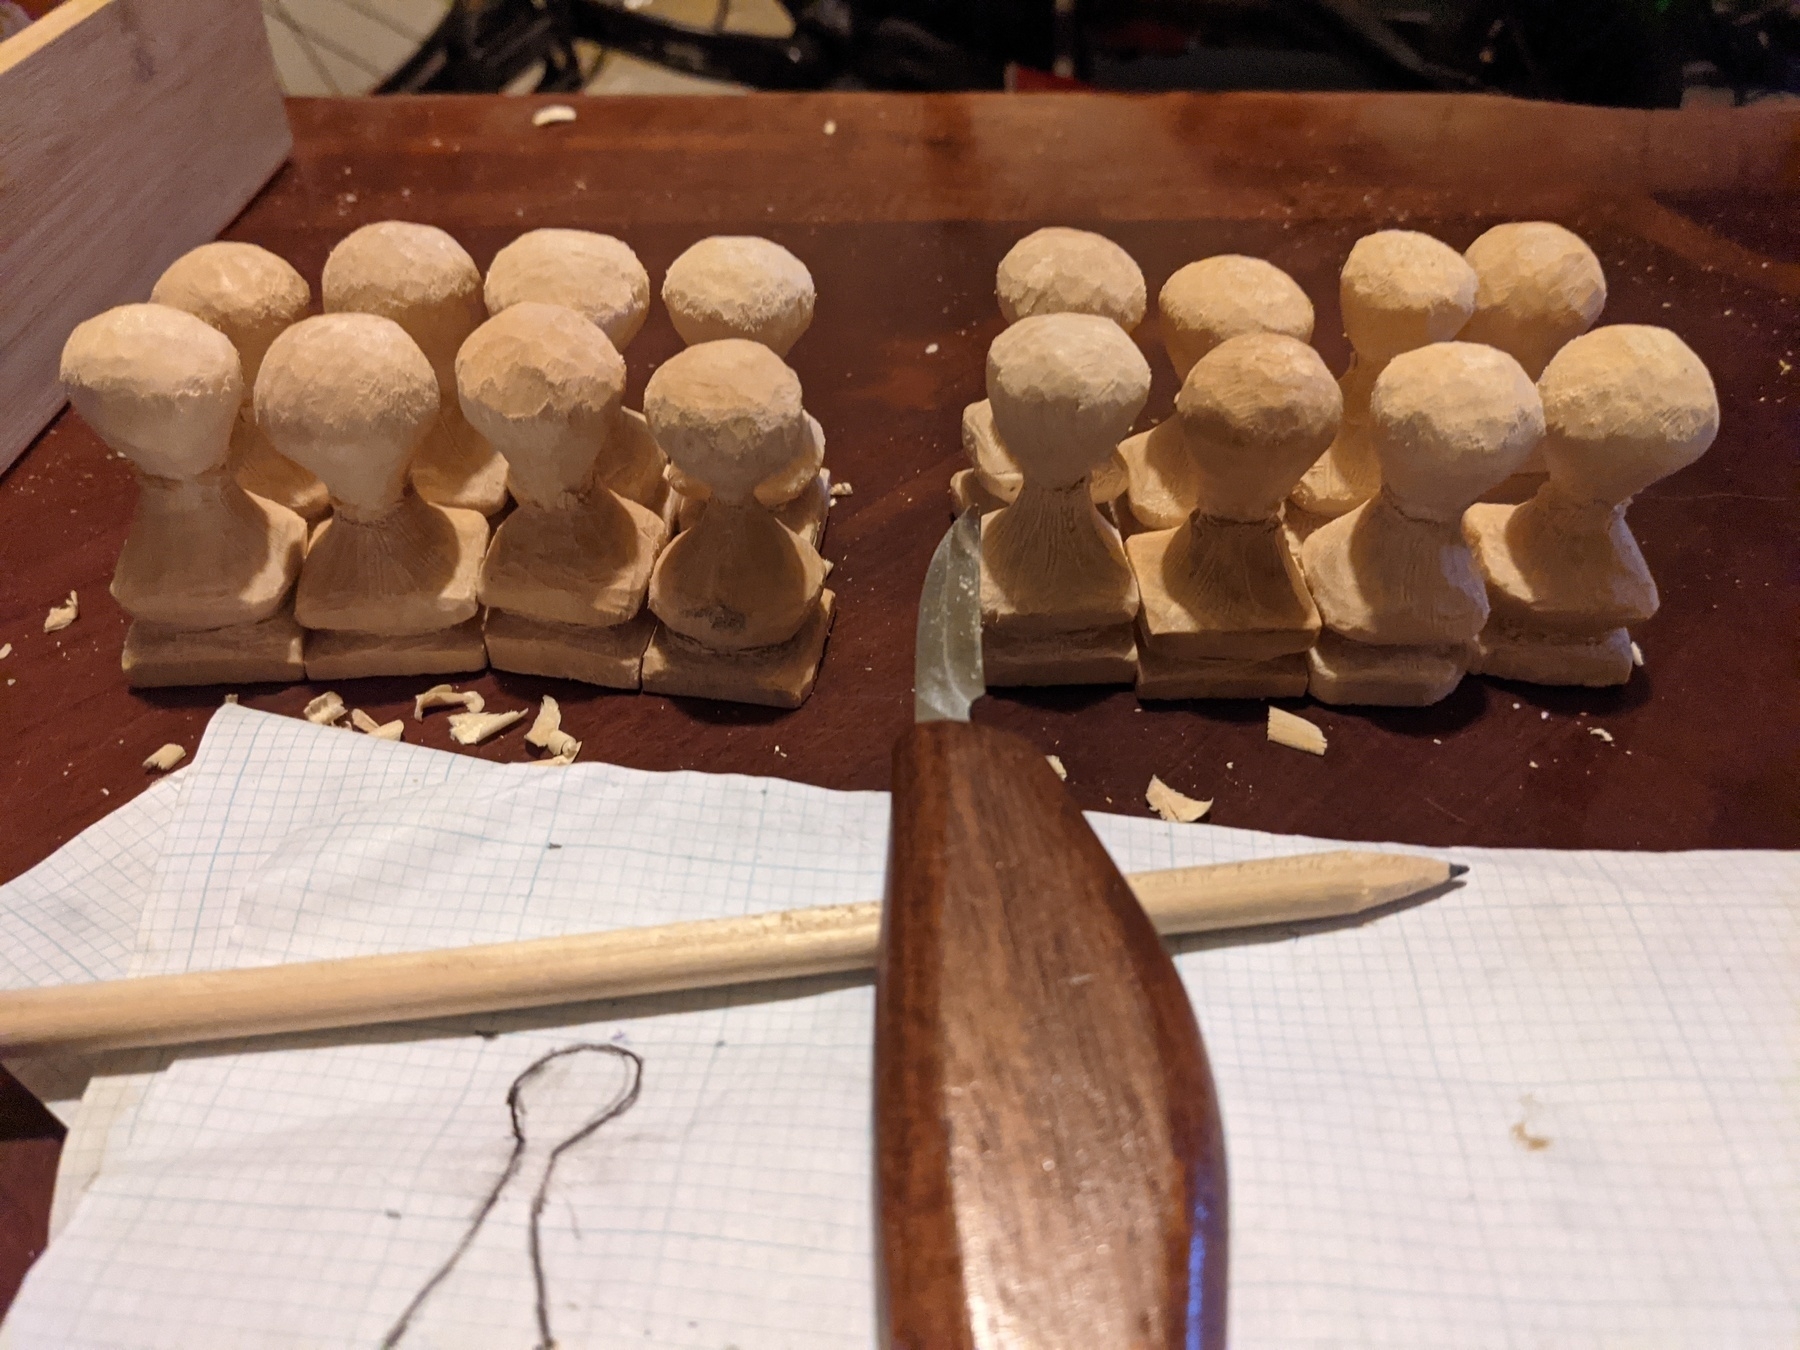 16 pawns carved with a knife in front